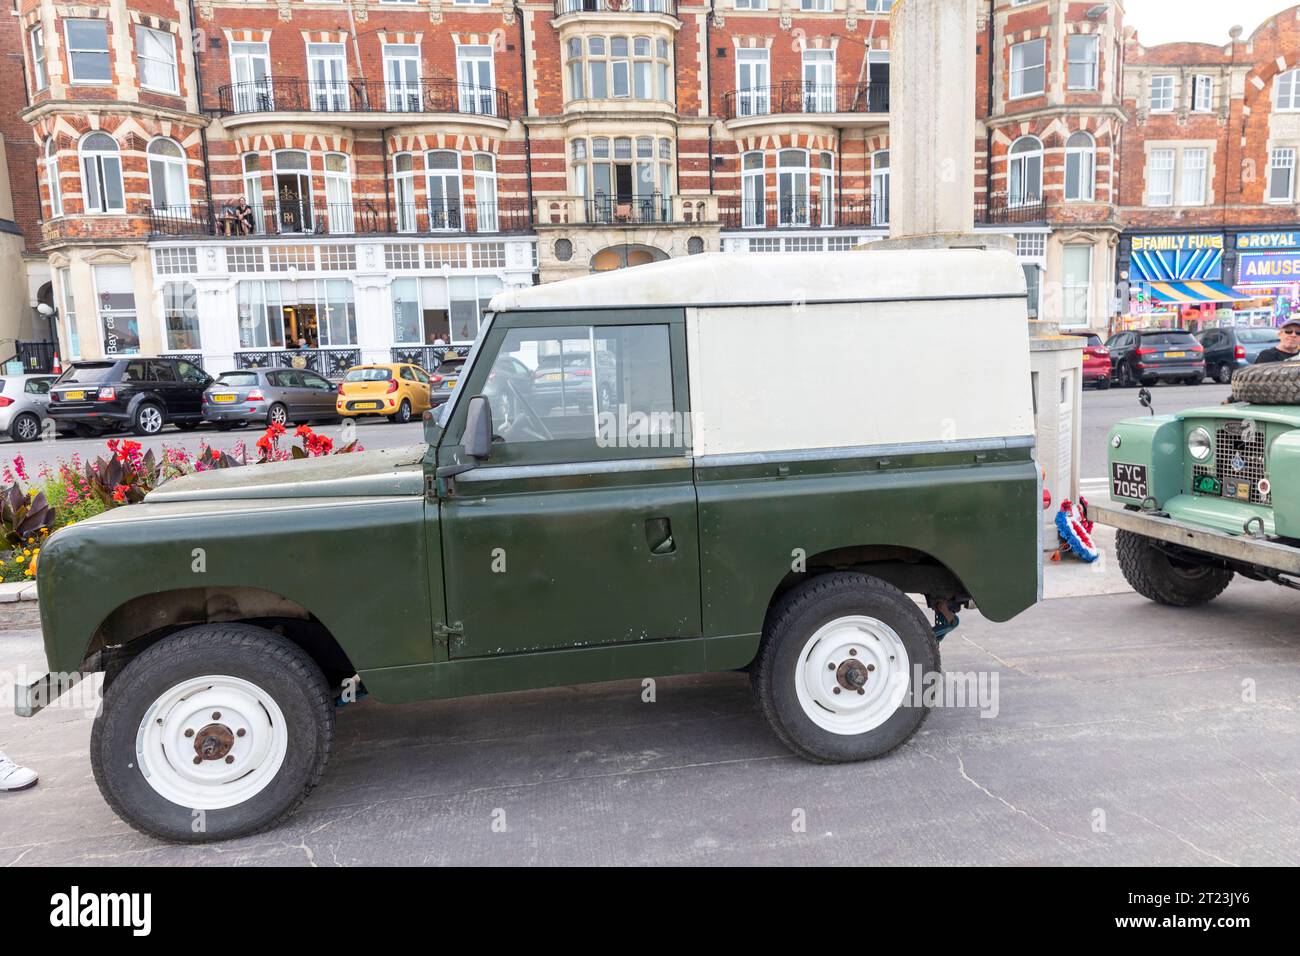 Dorset car club public event on Weymouth promenade with classic vintage Land Rover defender on display,England,UK,2023 Stock Photo